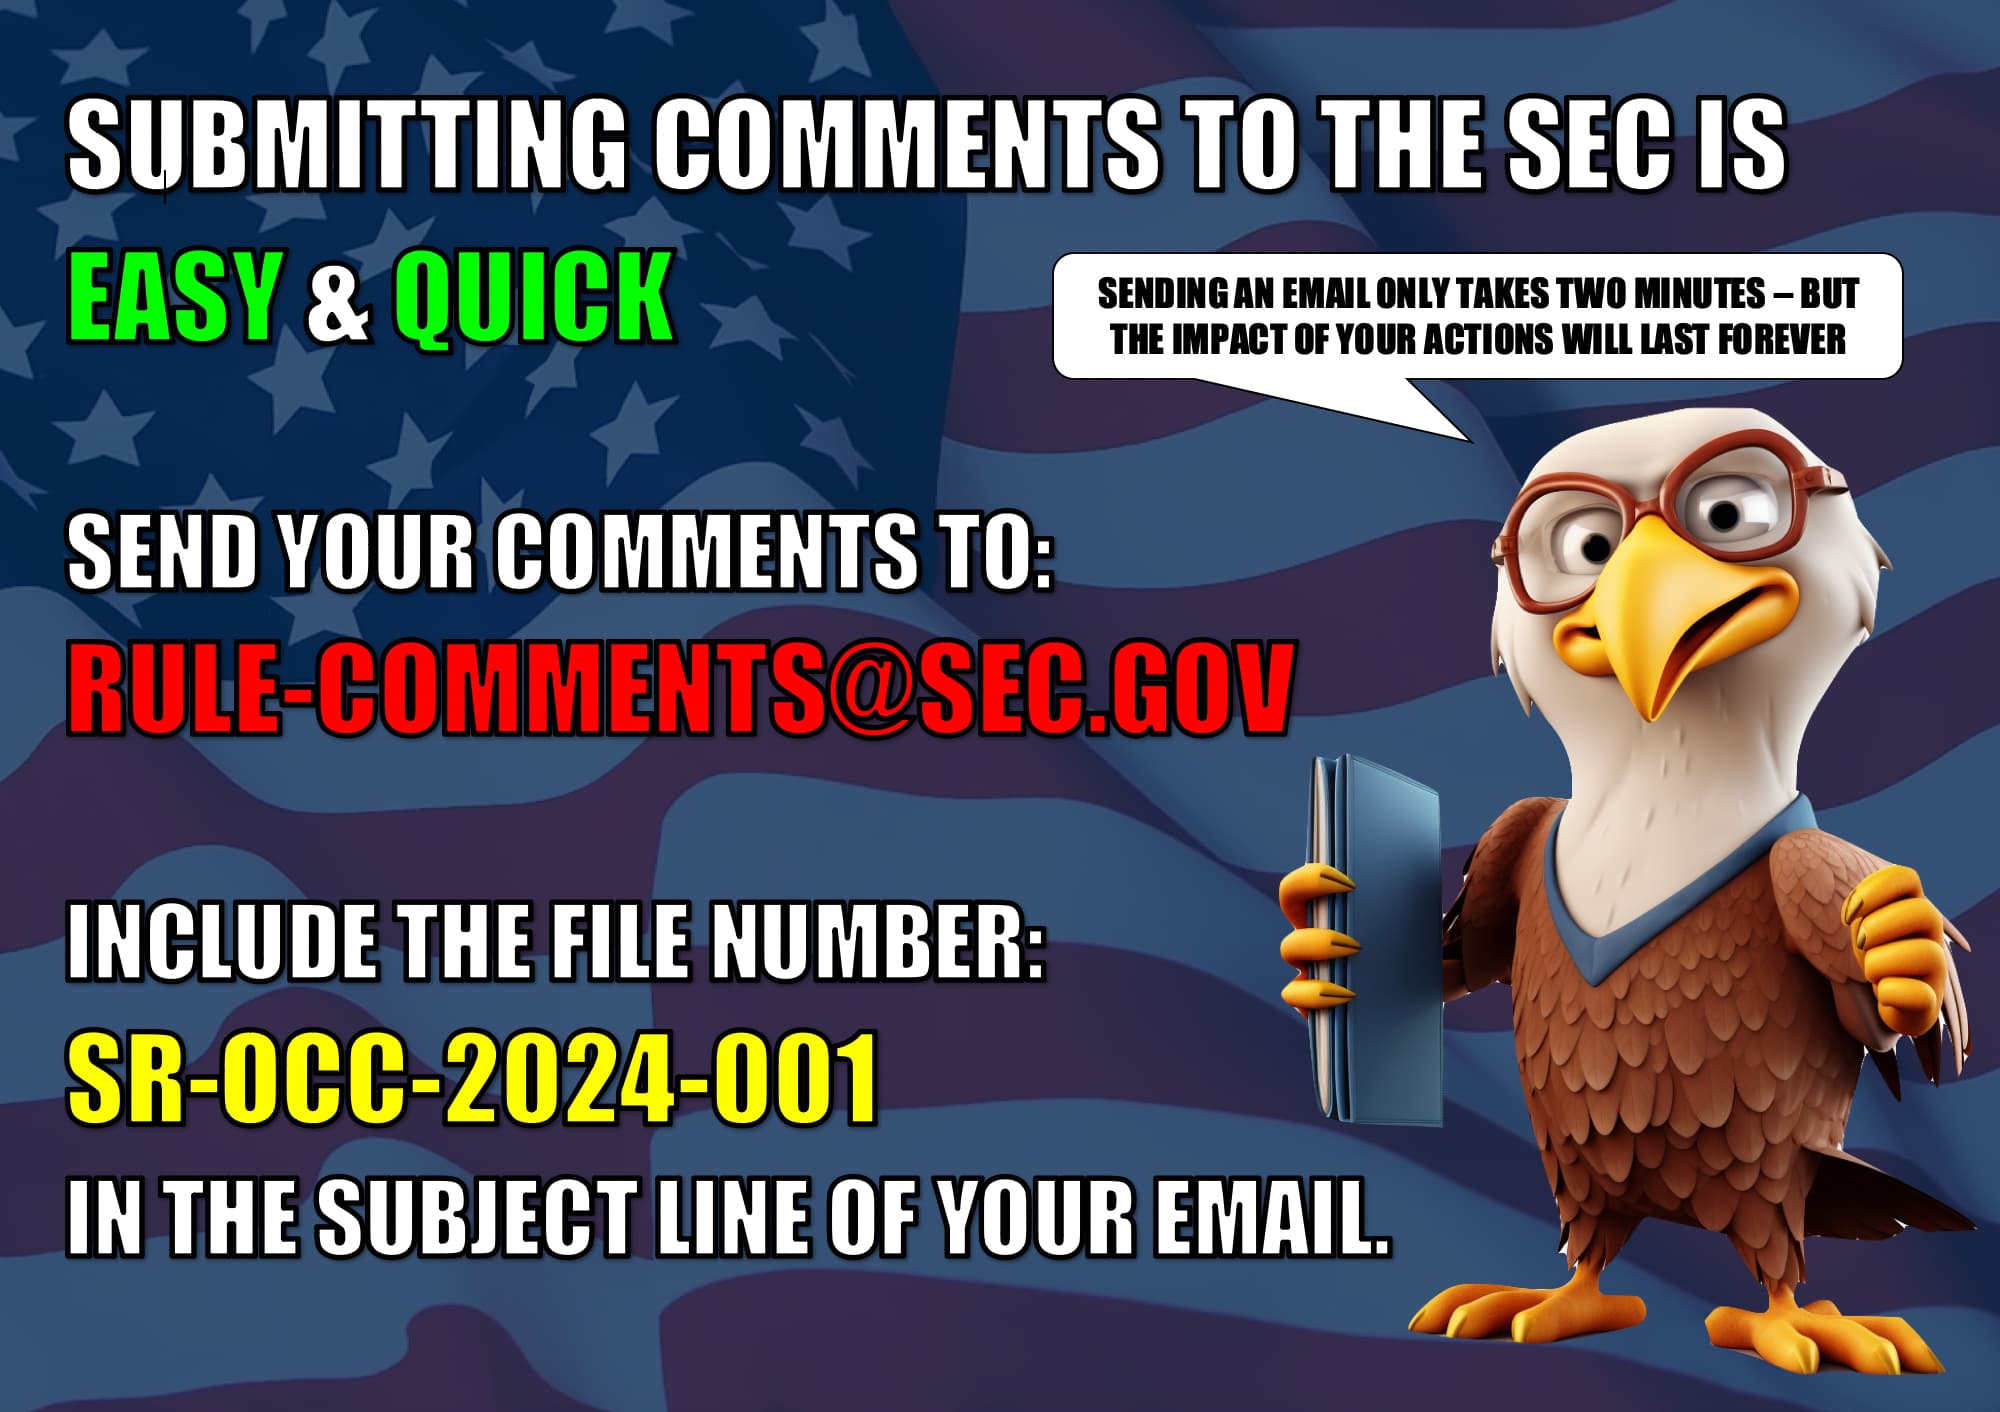 HOW TO CONTACT SEC PART 2